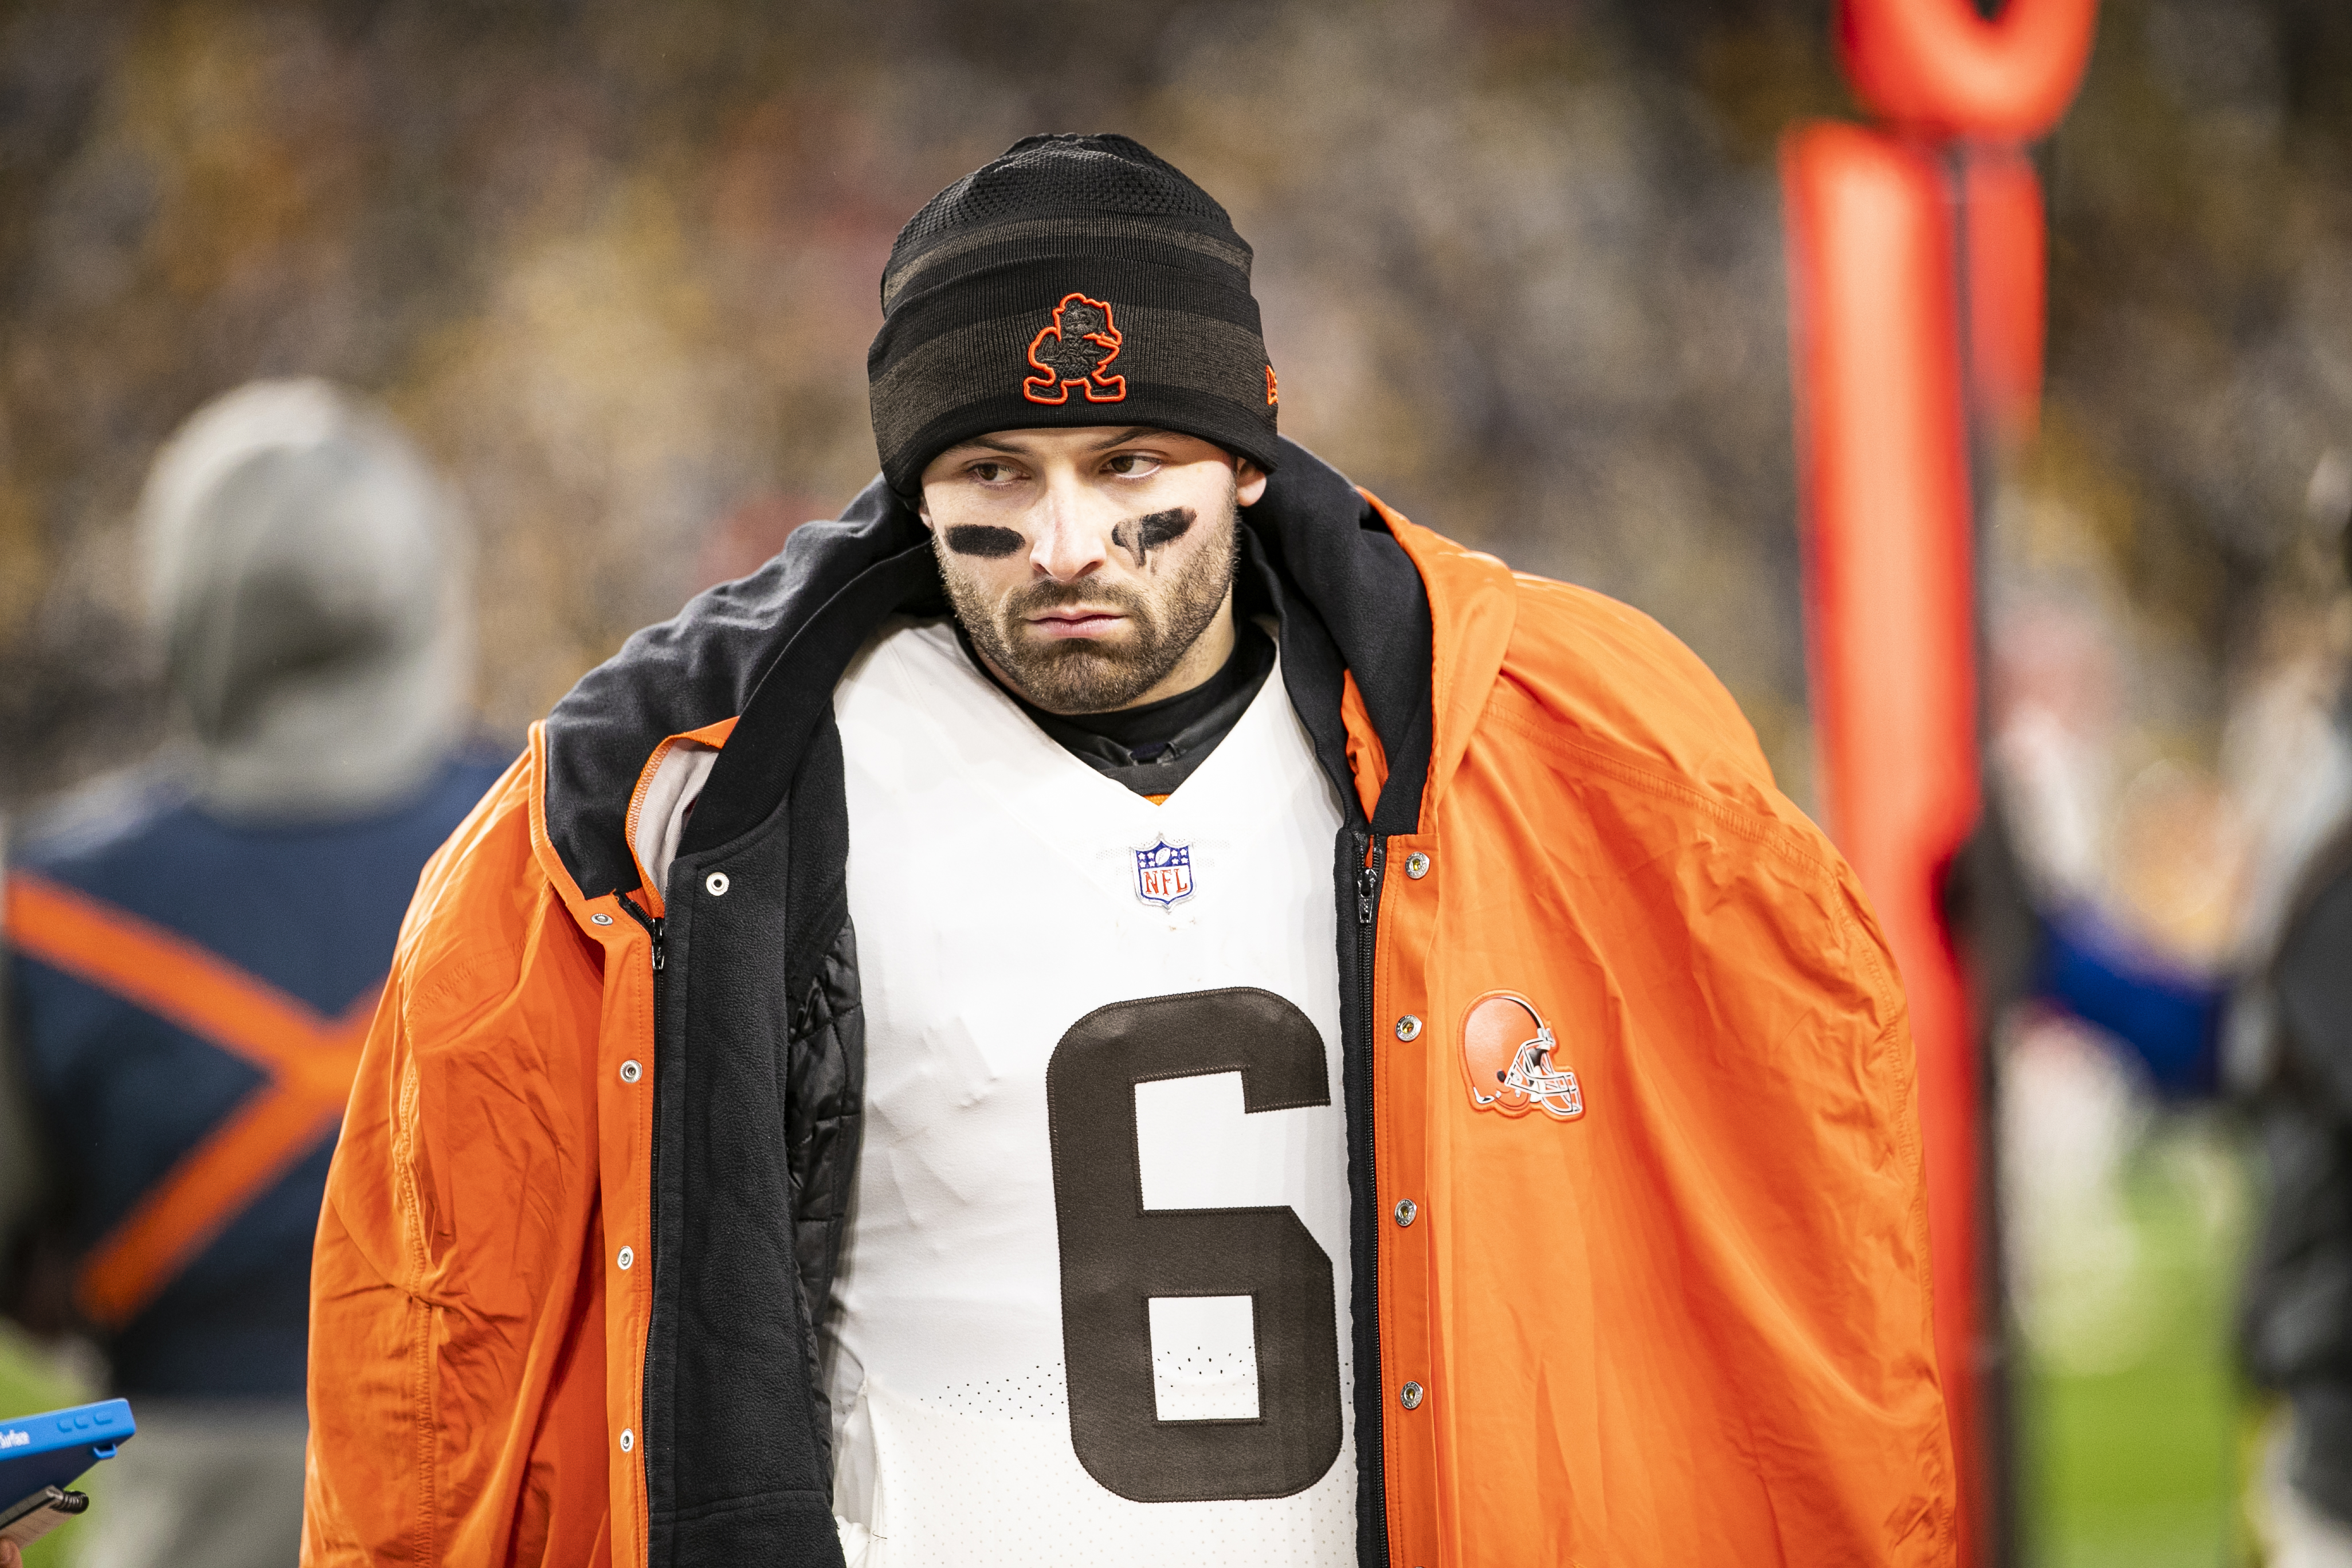 Cleveland Browns quarterback Baker Mayfield looks on form the sideline during an NFL game.